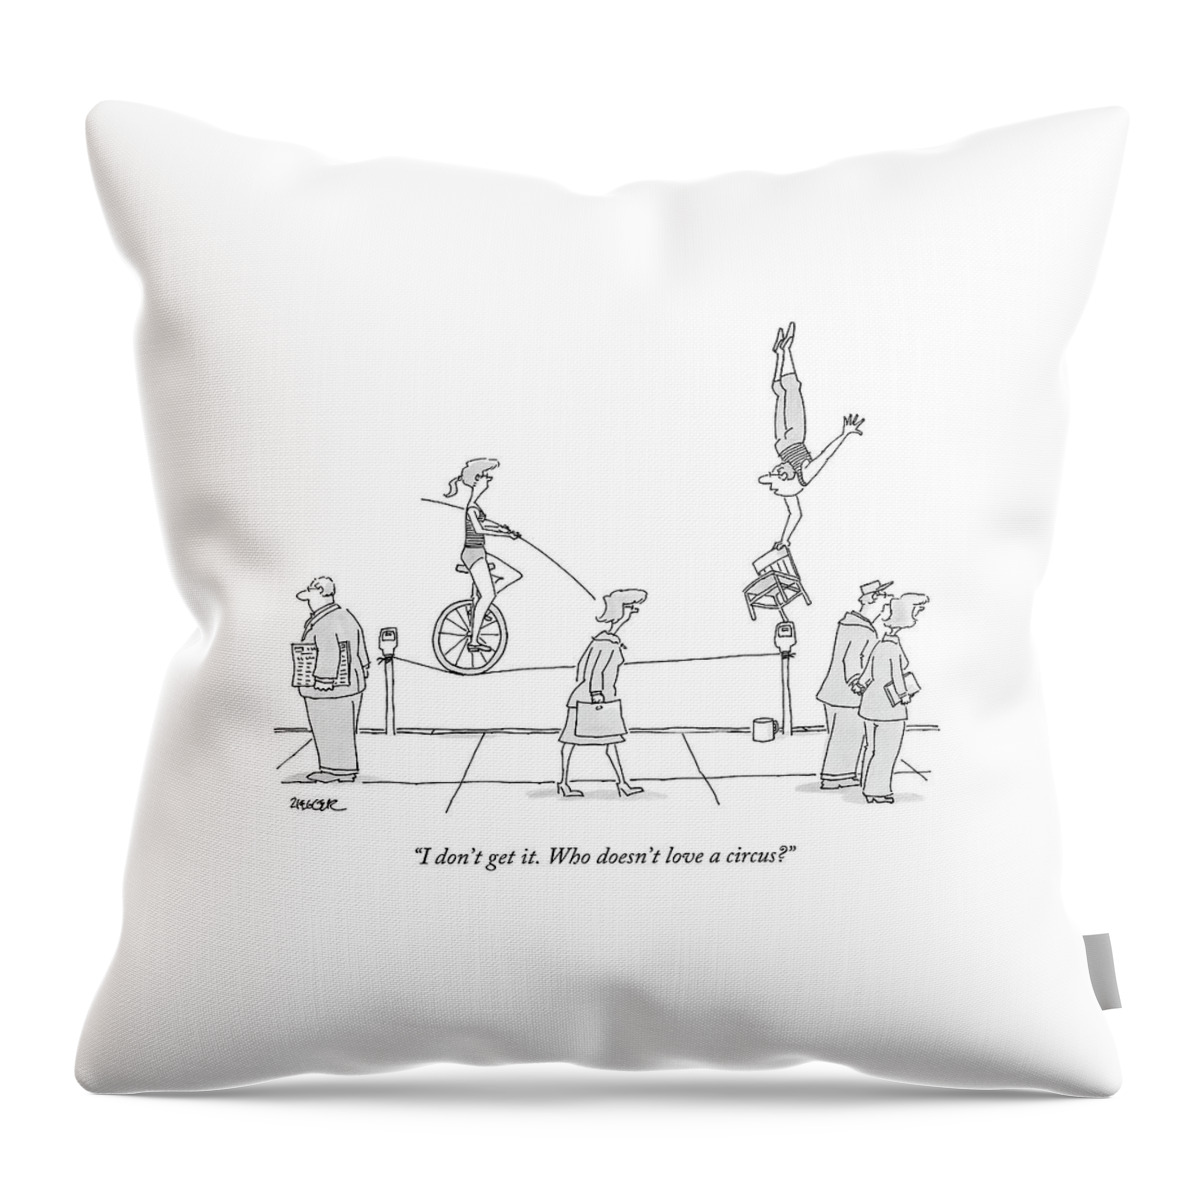 I Don't Get It. Who Doesn't Love A Circus? Throw Pillow